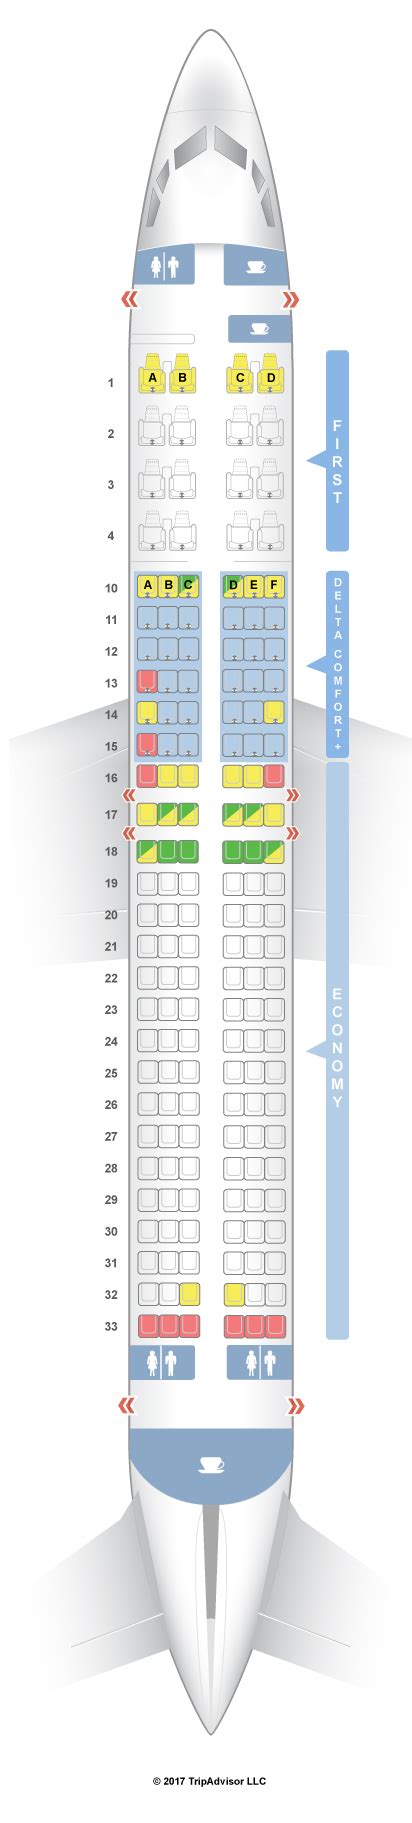 Boeing 737-800 (73H) Seat Map. Info. Photos. Click any seat for more information. 